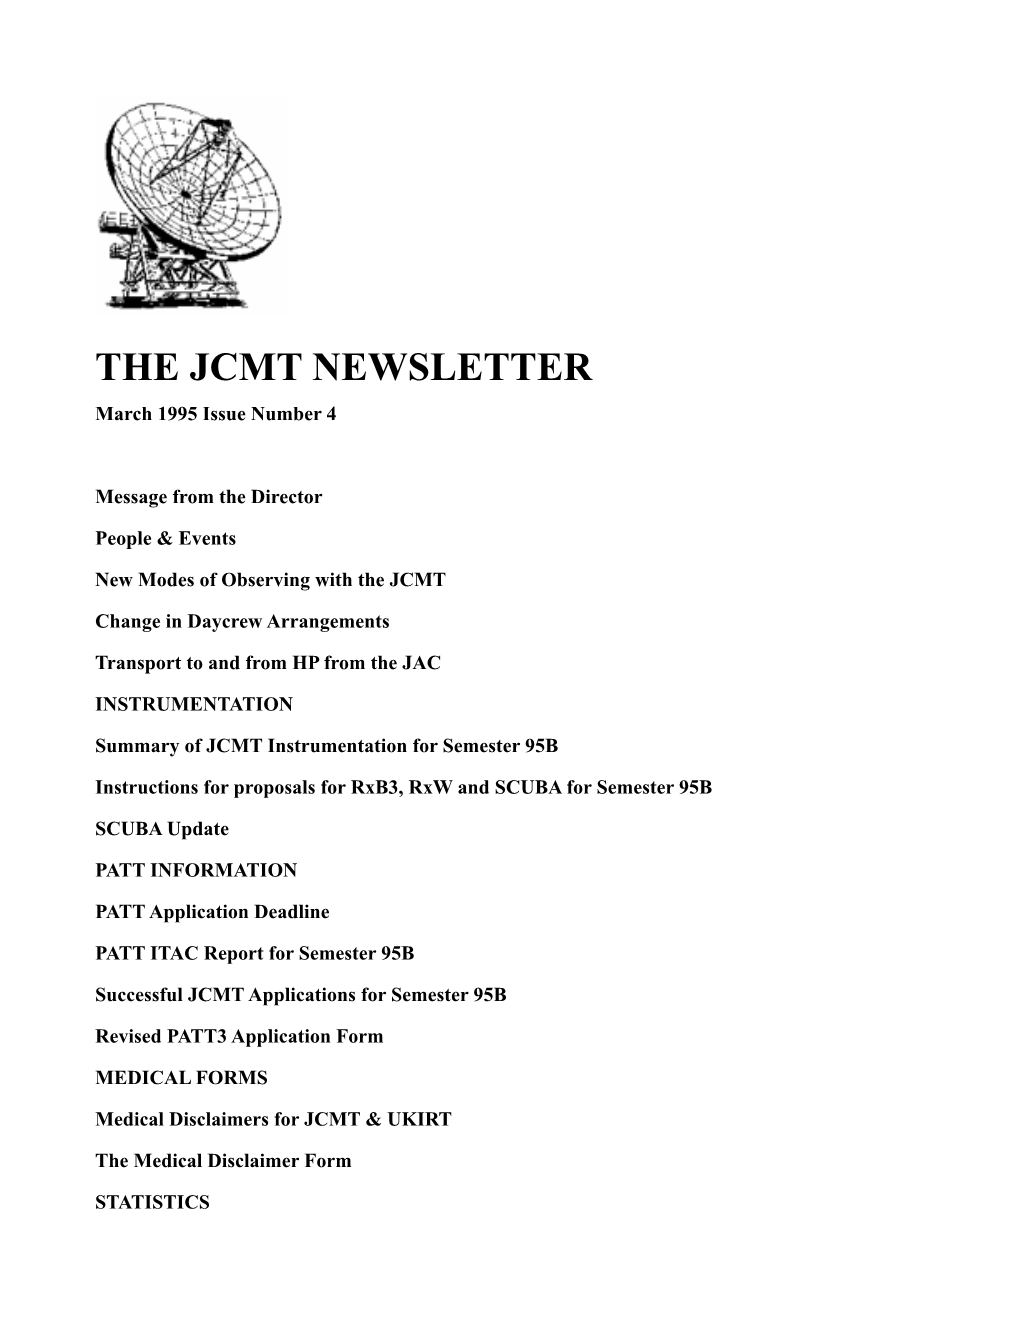 THE JCMT NEWSLETTER March 1995 Issue Number 4